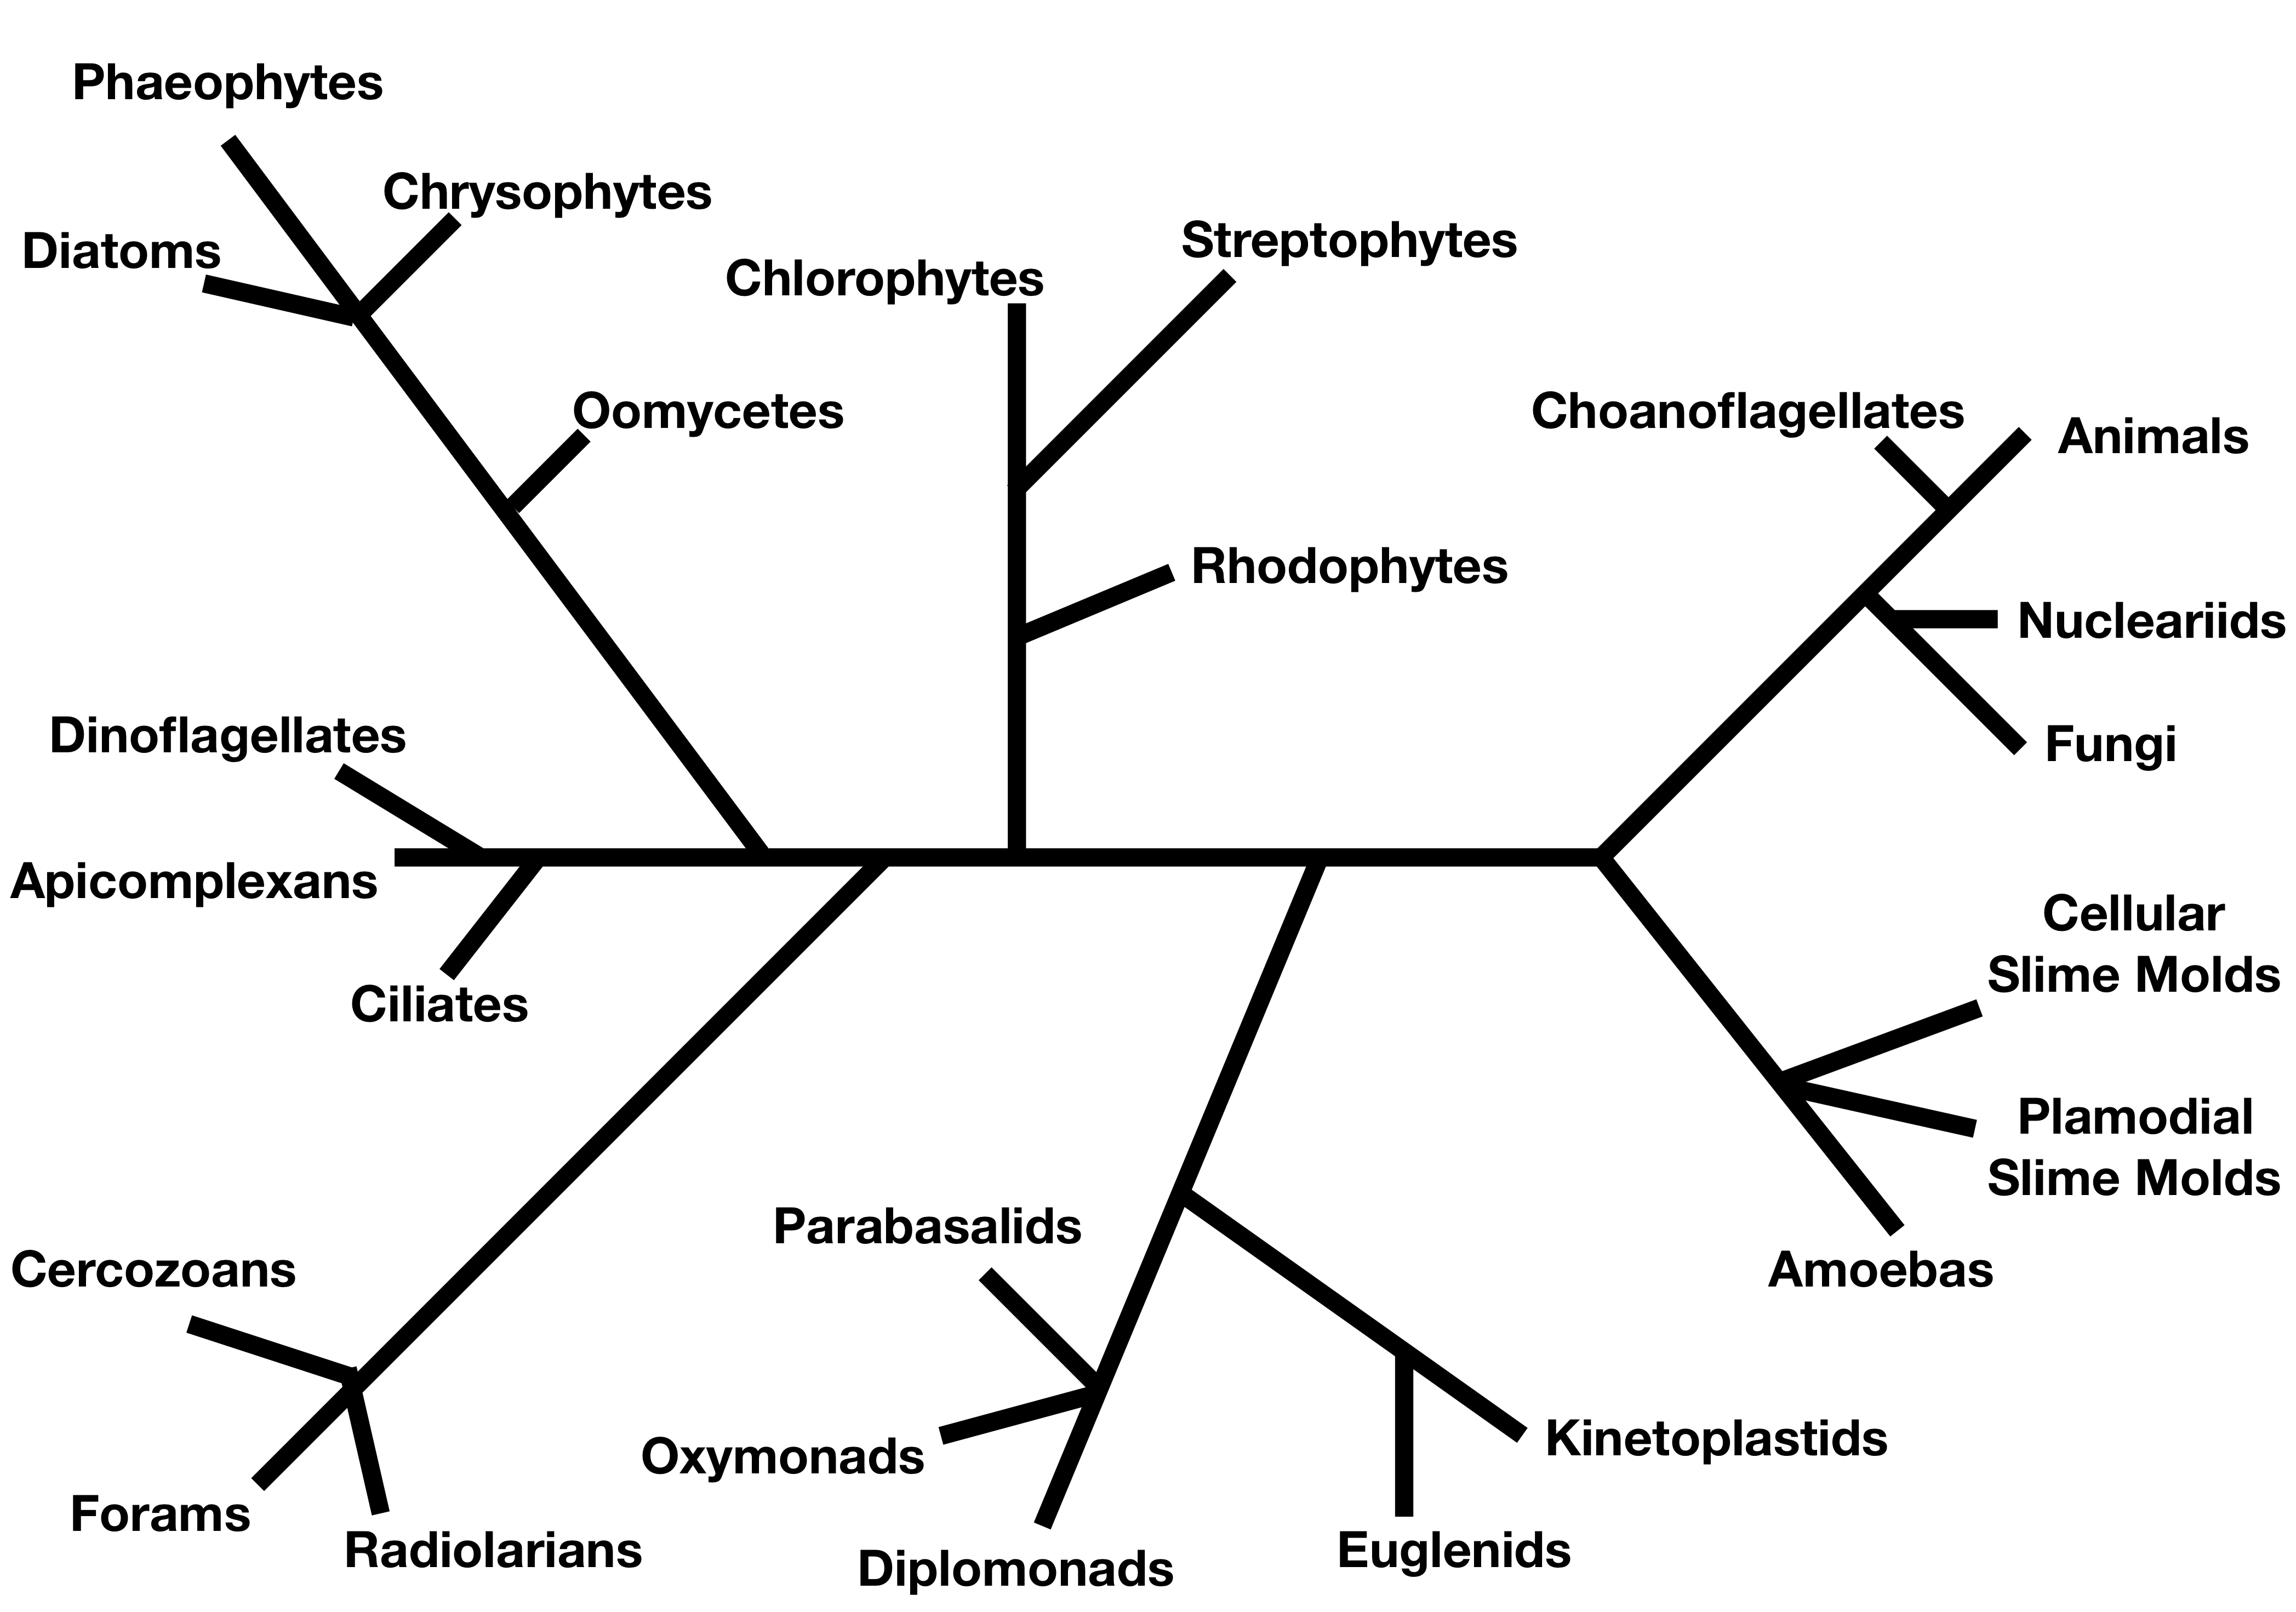 A phylogenetic tree showing major groups of eukaryotes